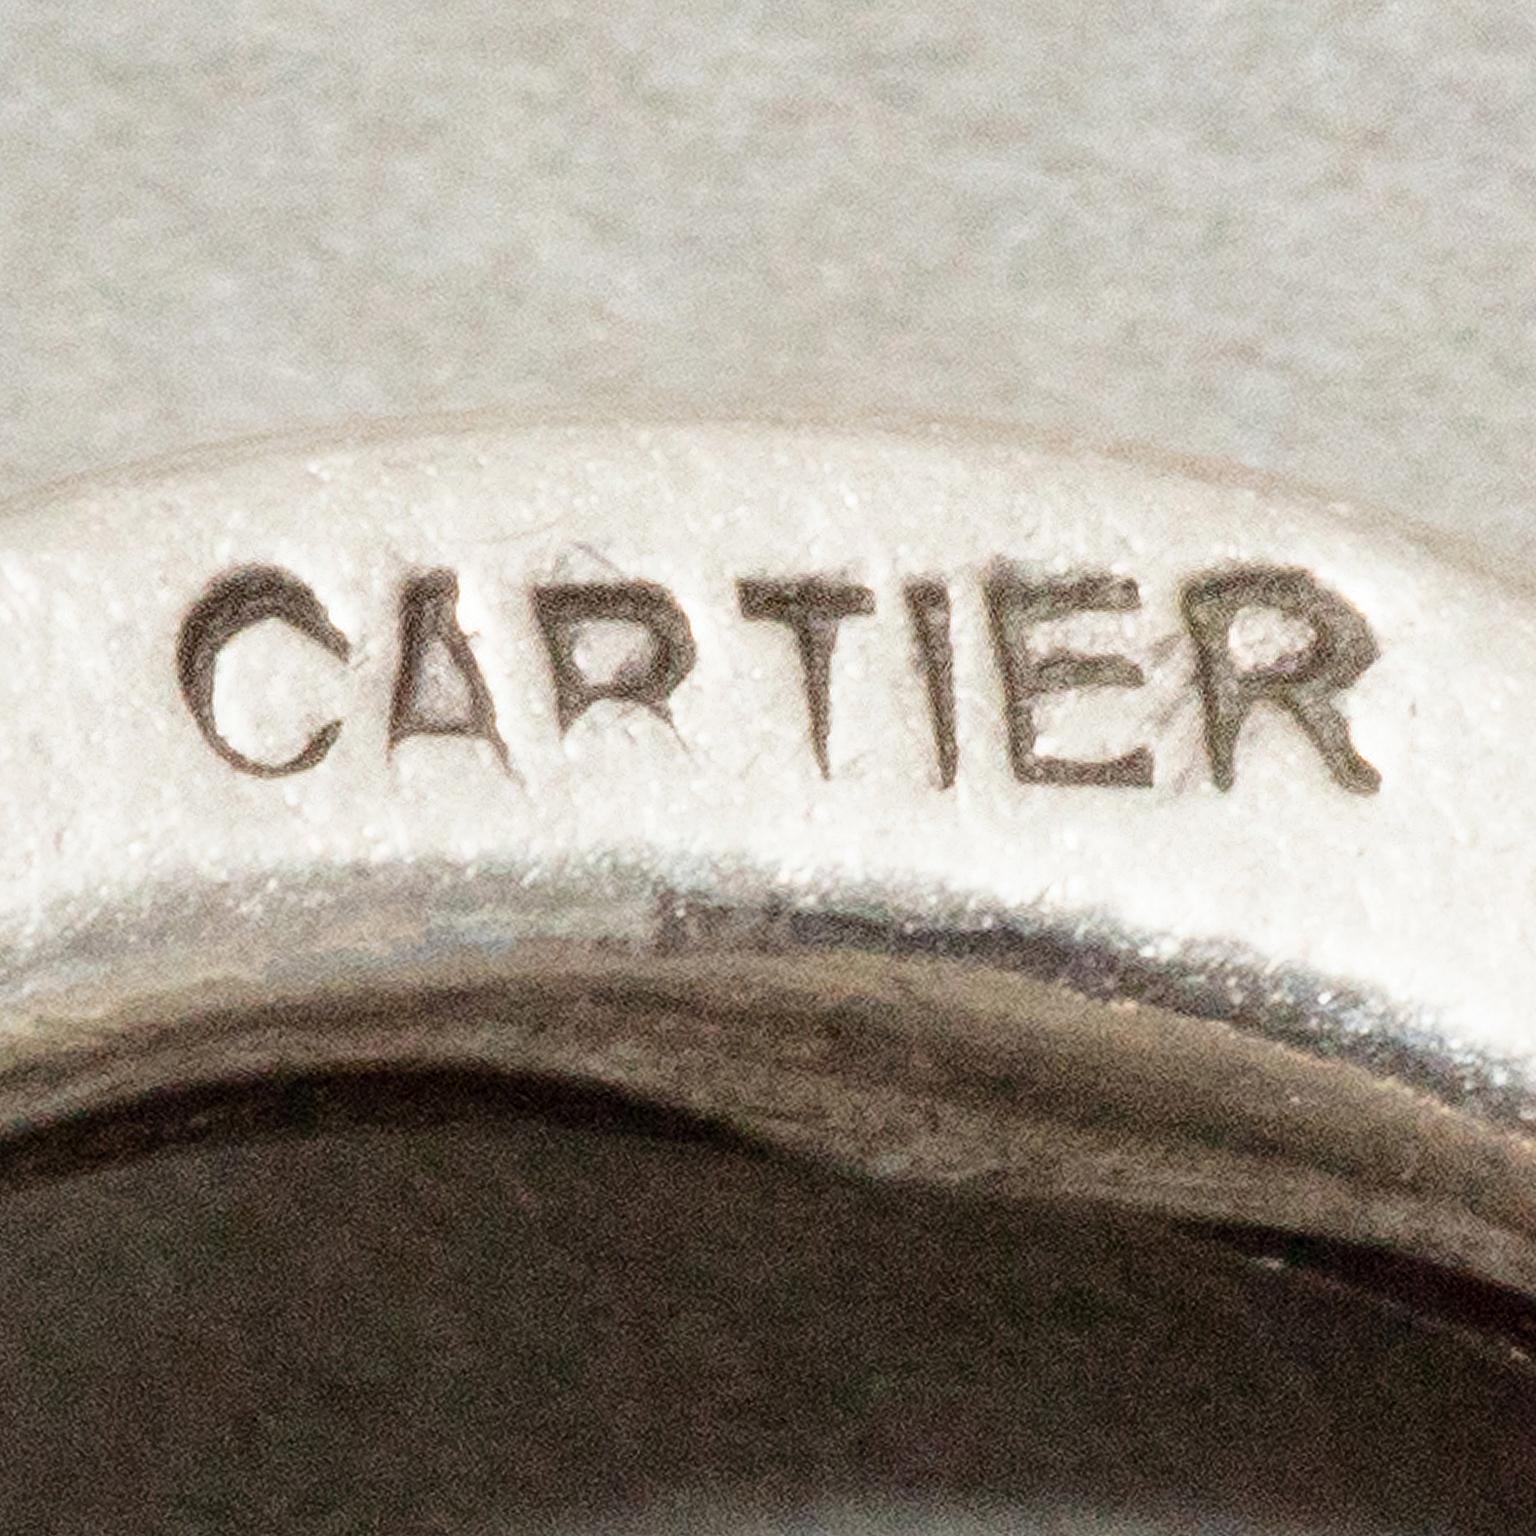 A 14 carat gold and silver bracelet with facetted oval links and three gold links with the Cartier logo, with a toggle clasp, signed: Cartier, American, circa 1980.
 
weight: 26.40 grams
length: 18.5 cm  and 17.5 without toggle